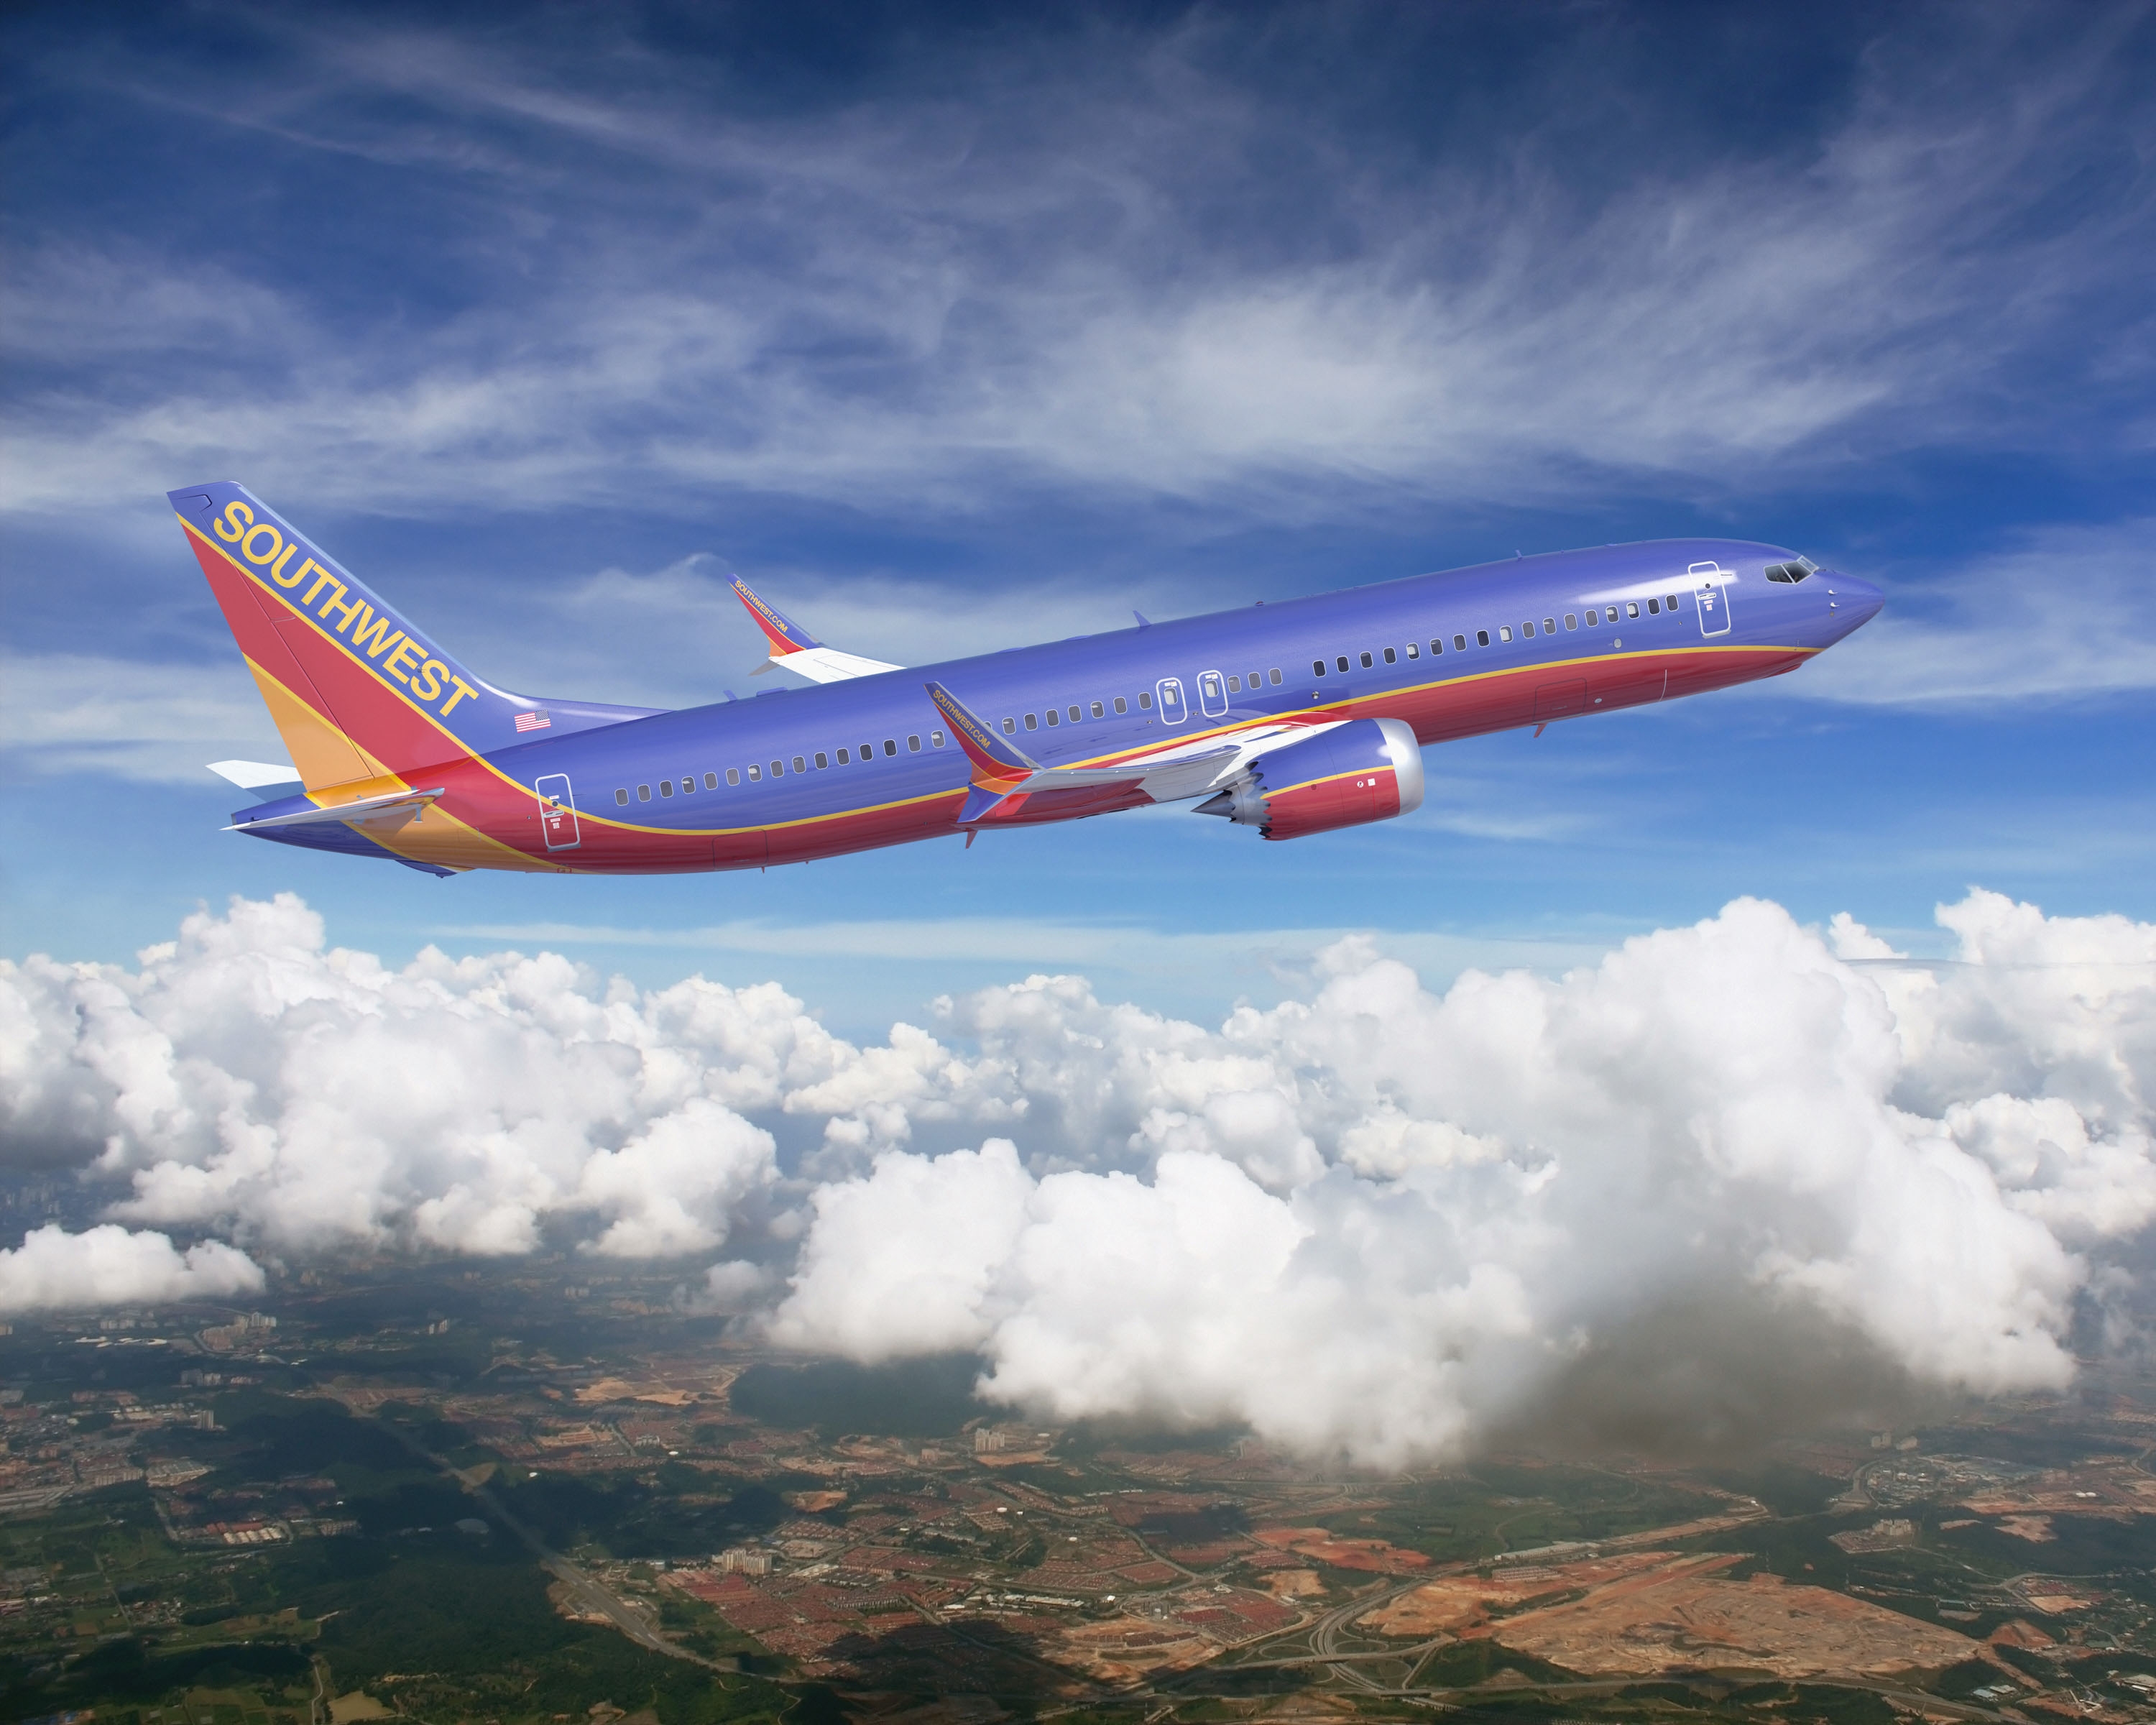 Southwest Airlines aircraft wings collide